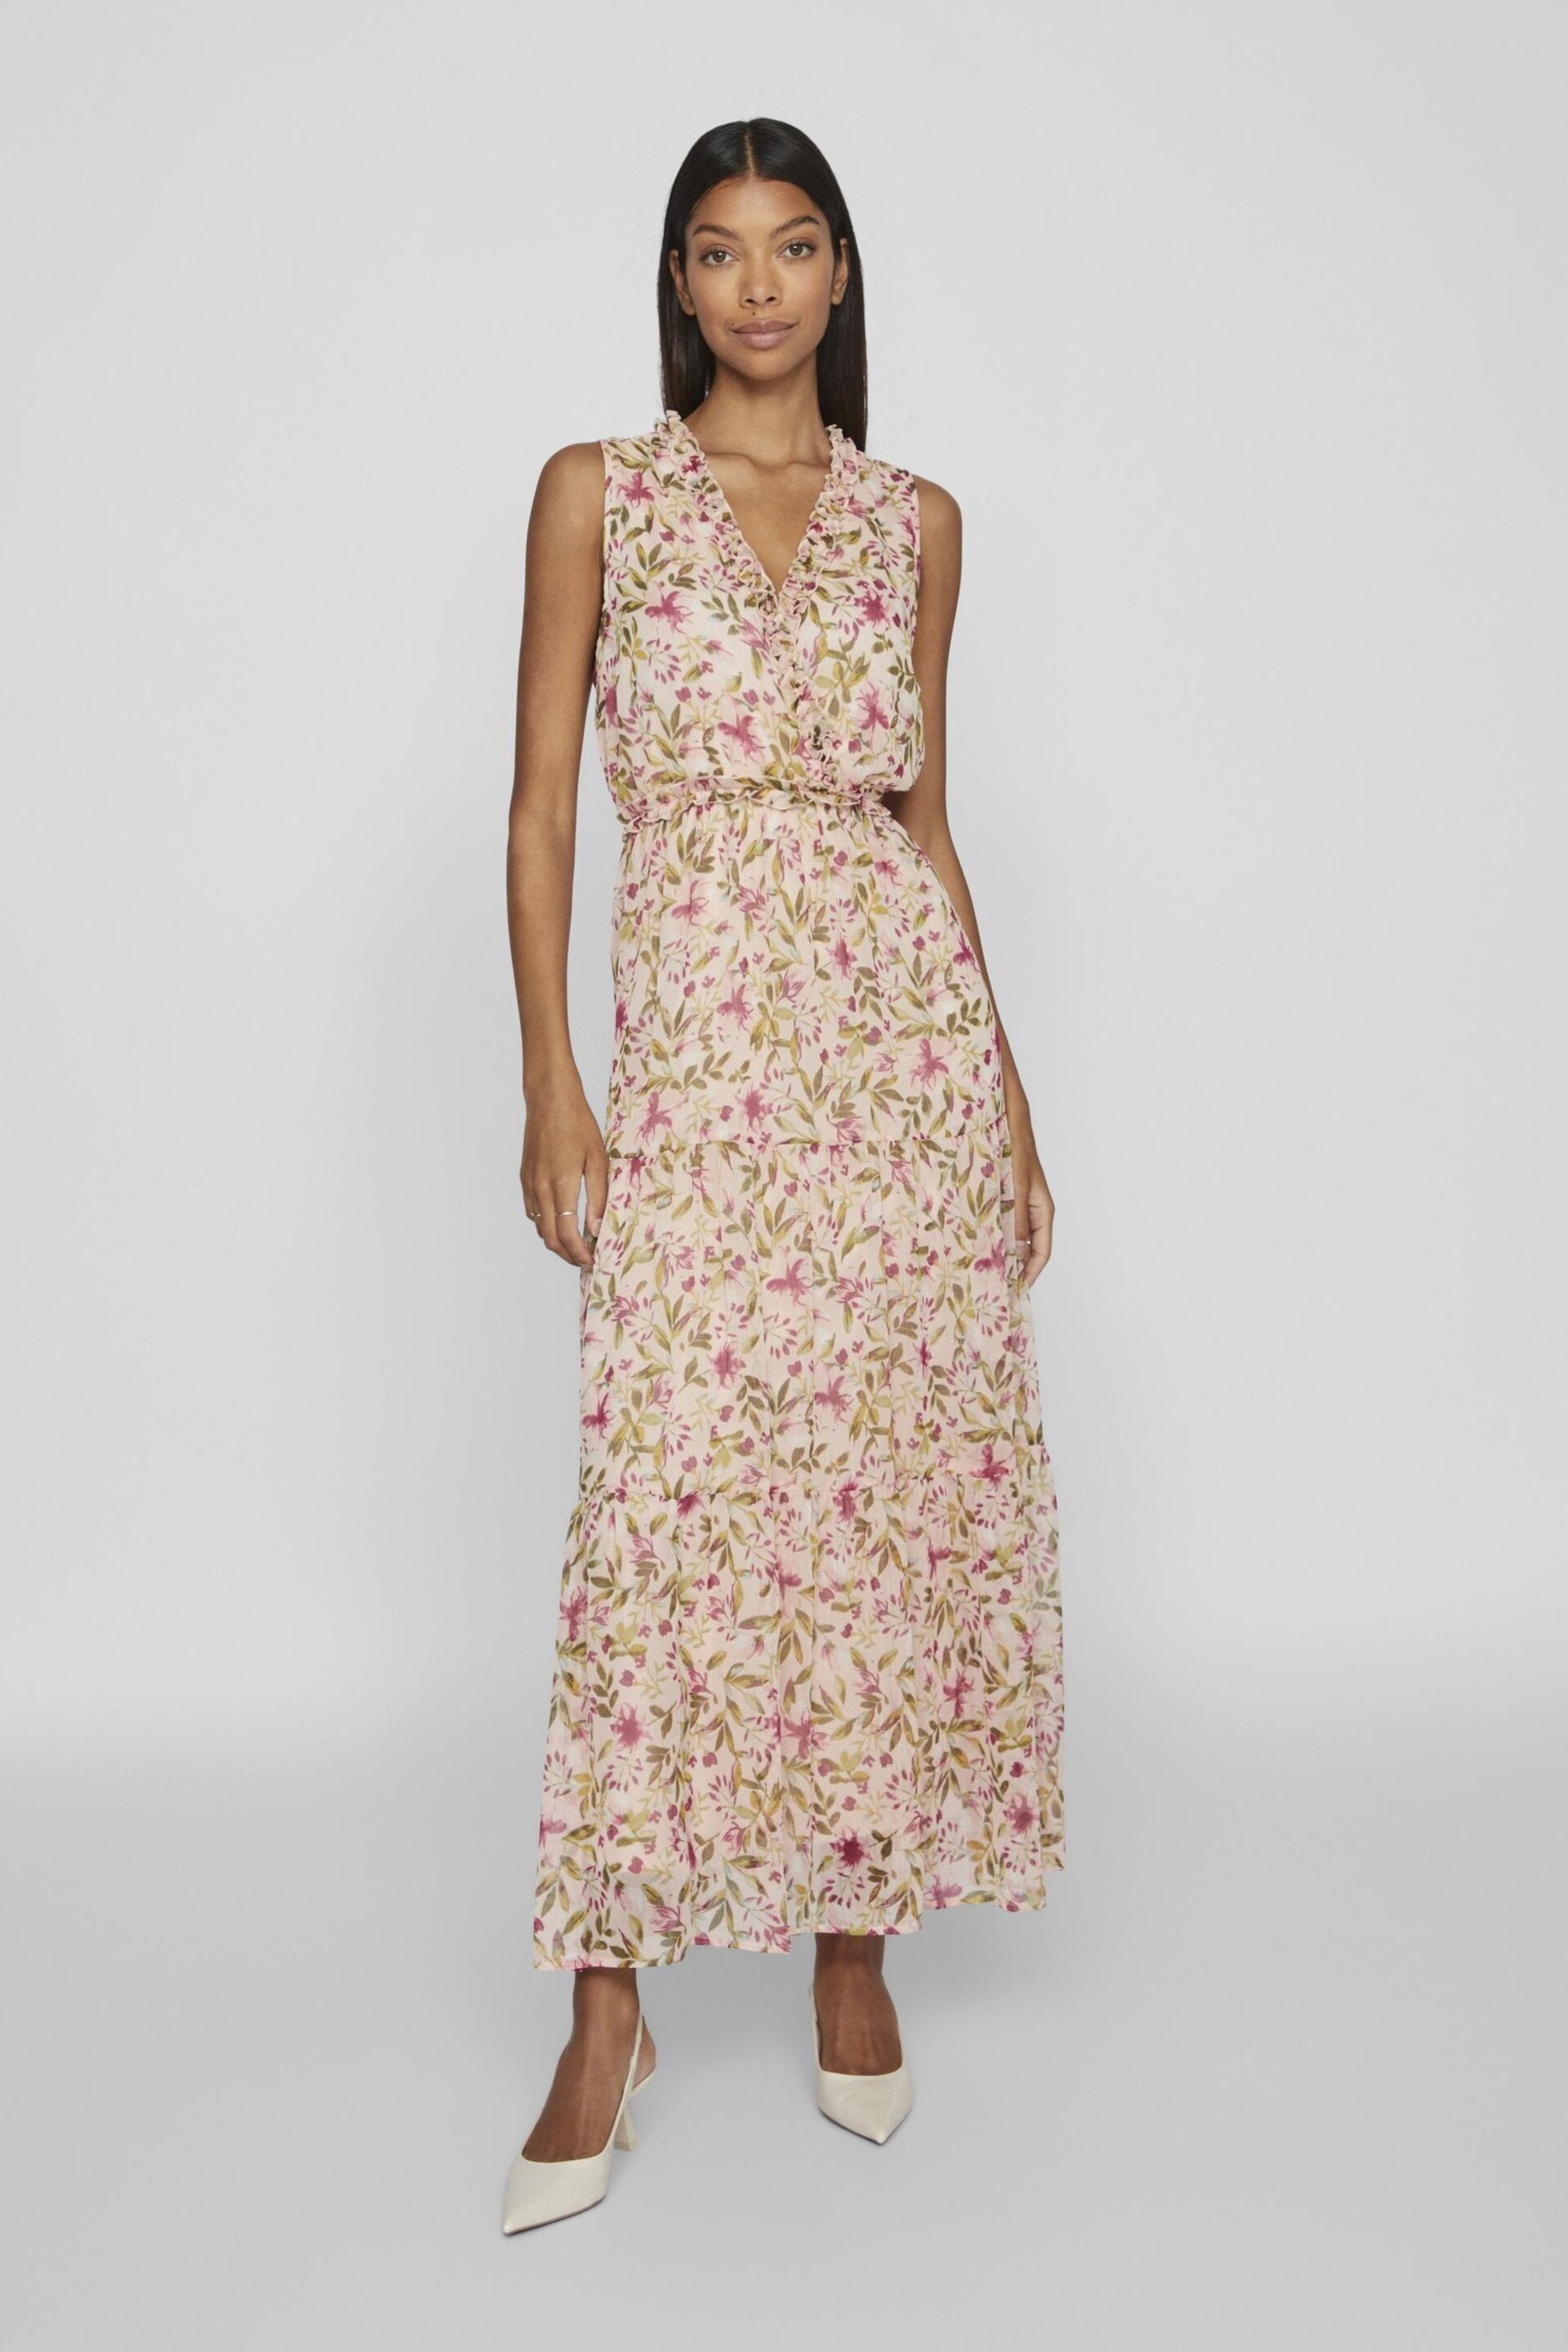 VILA Pink Floral Ruffle Tiered Maxi Occasion Dress - Image 1 of 4